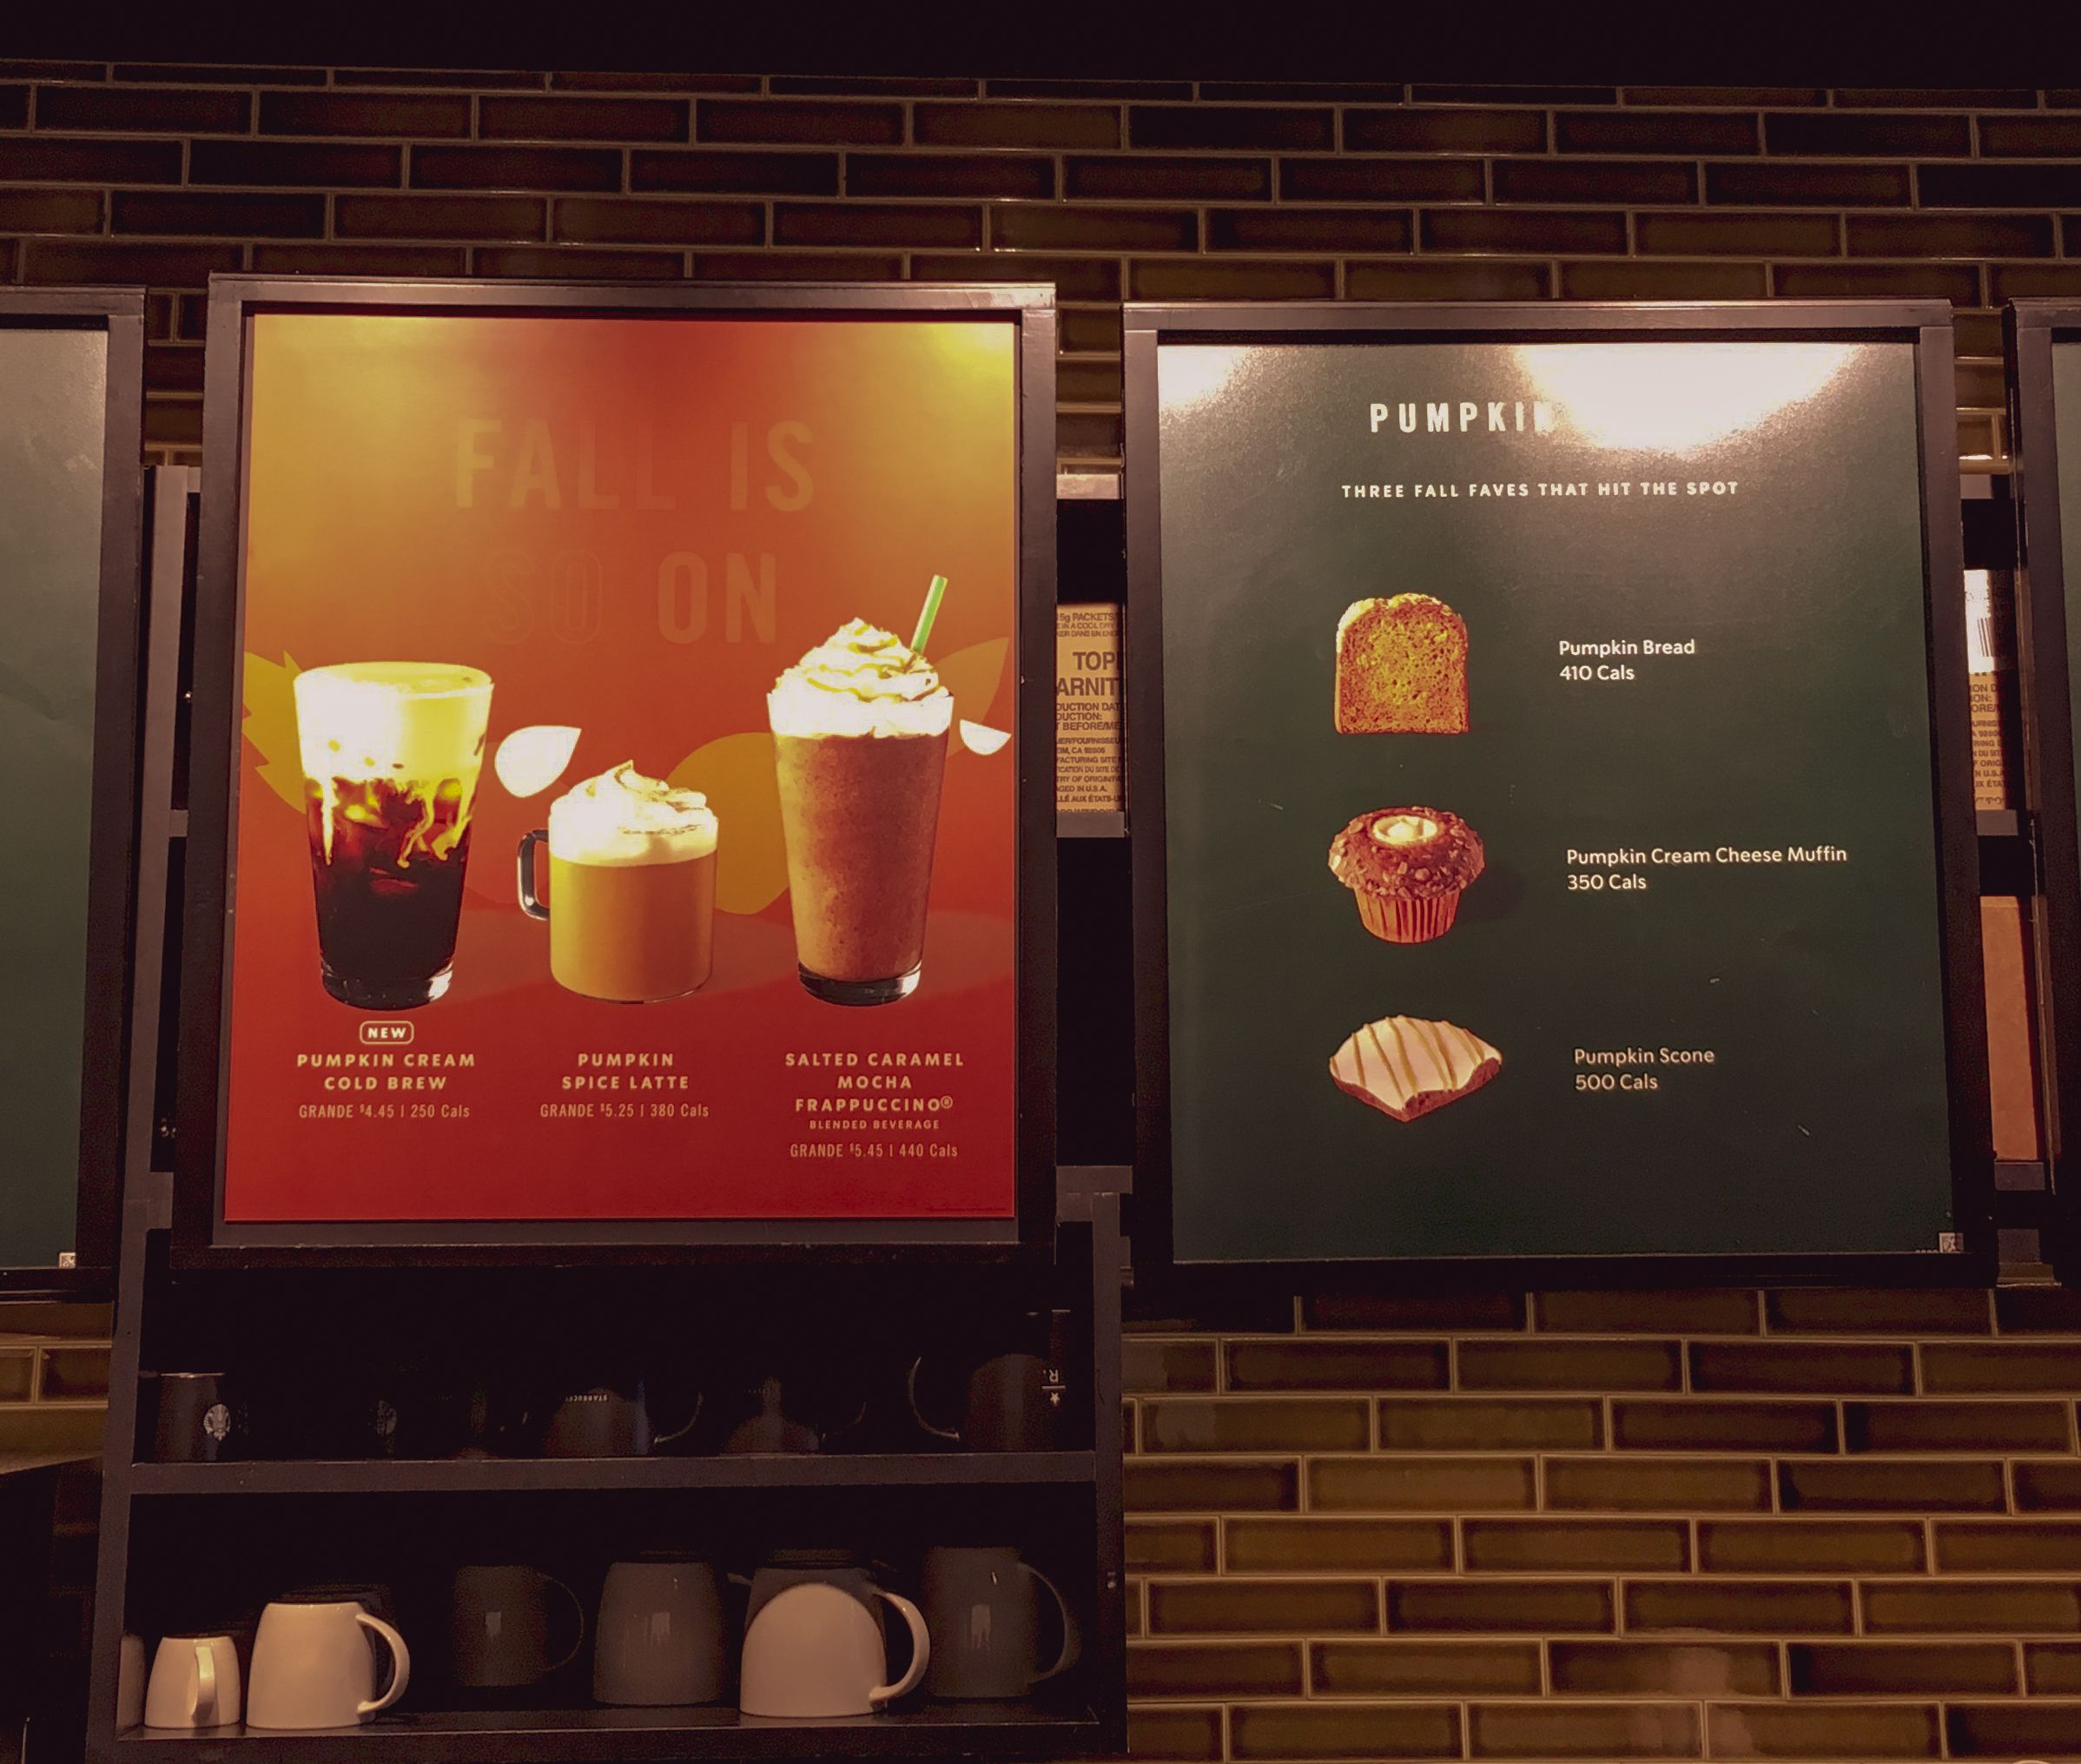 Pumpkin spice latte and other specialties on a Starbucks menu.  